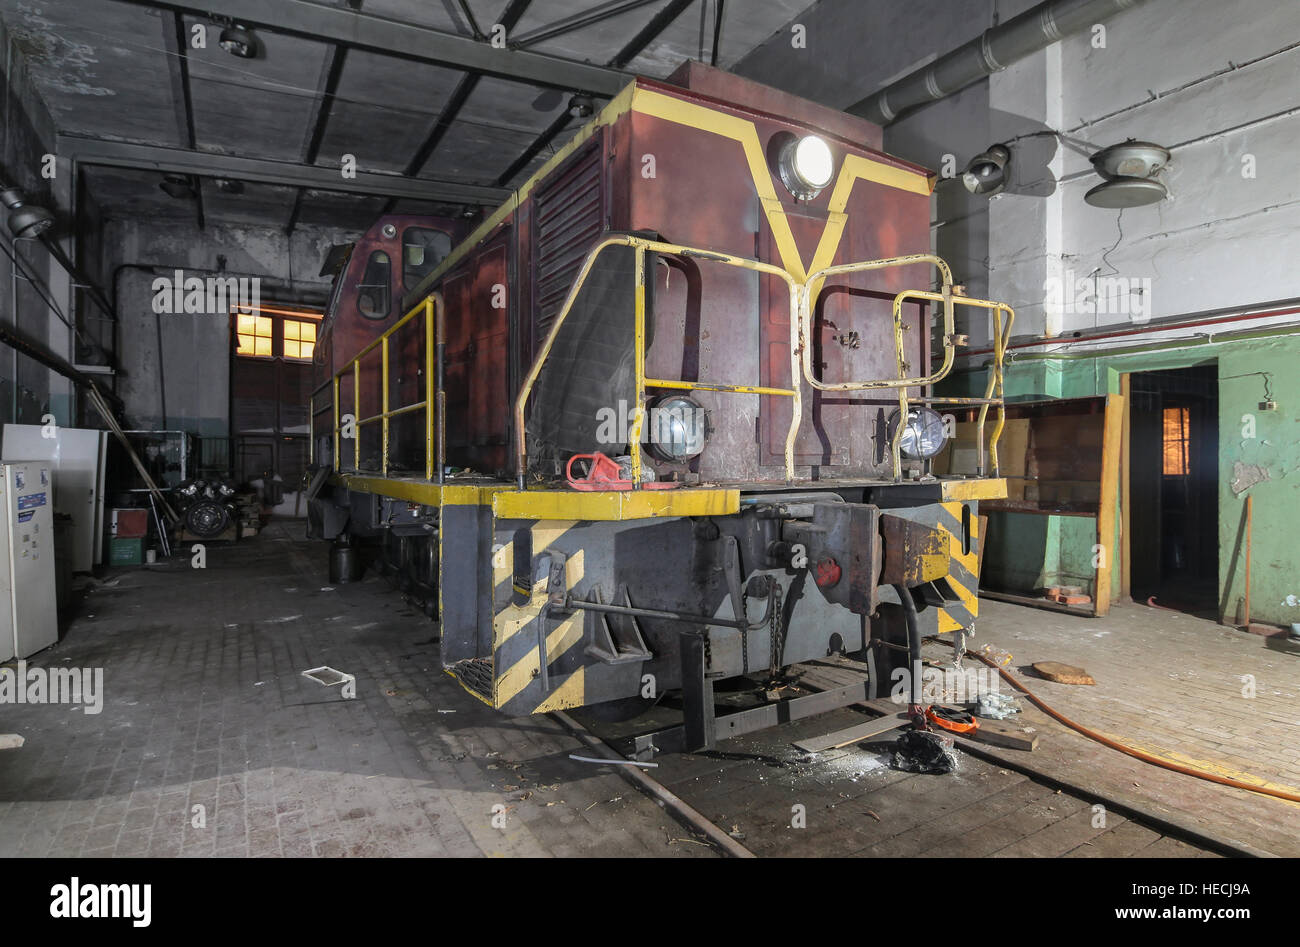 Old soviet shunting diesel locomotive in the abandoned room for servicing Stock Photo